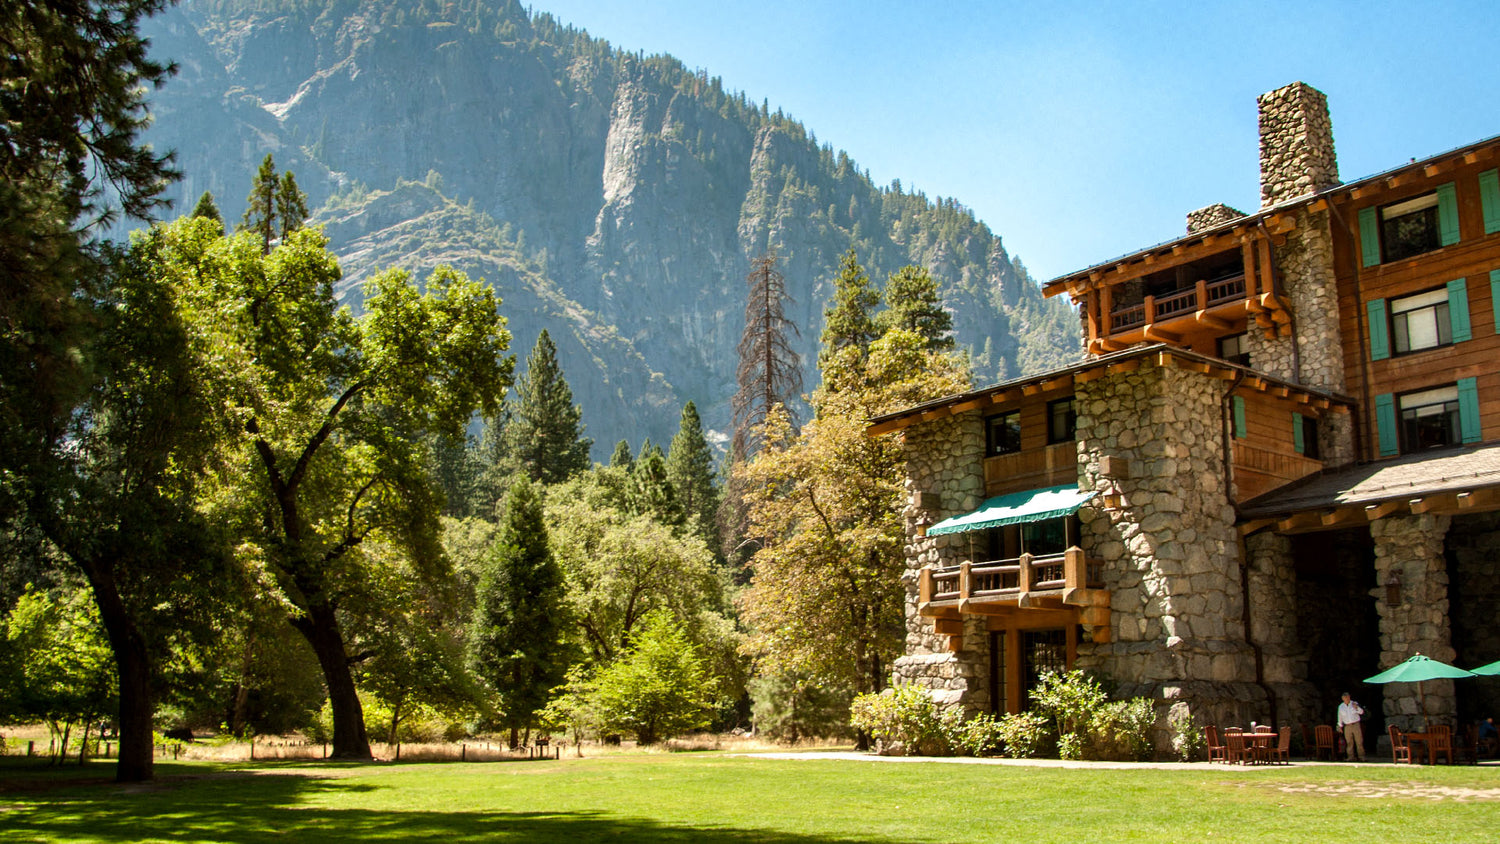 In-park hotels like the Majestic Yosemite Hotel at Yosemite National Park add an element of luxury to any outdoor adventure